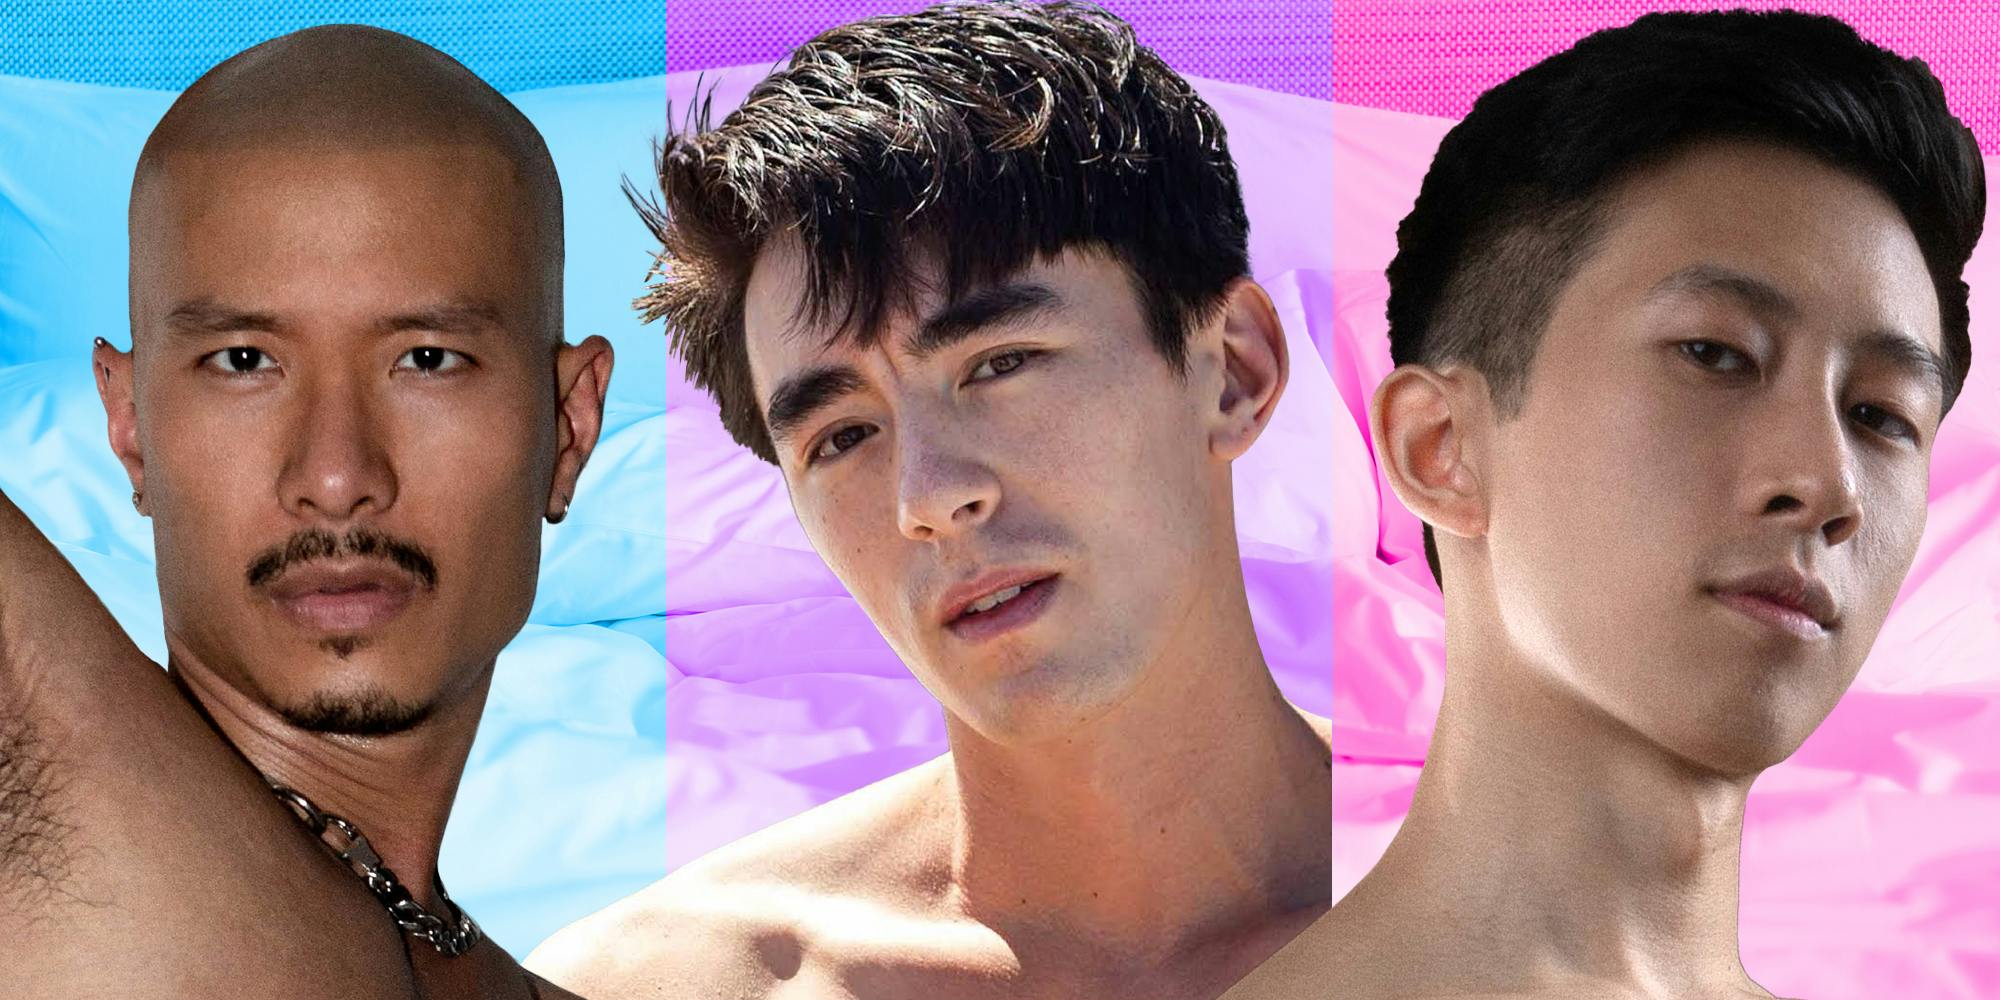 With Asian Guy - Asian Men Are Marginialized In Porn. Gay Men Are Changing That